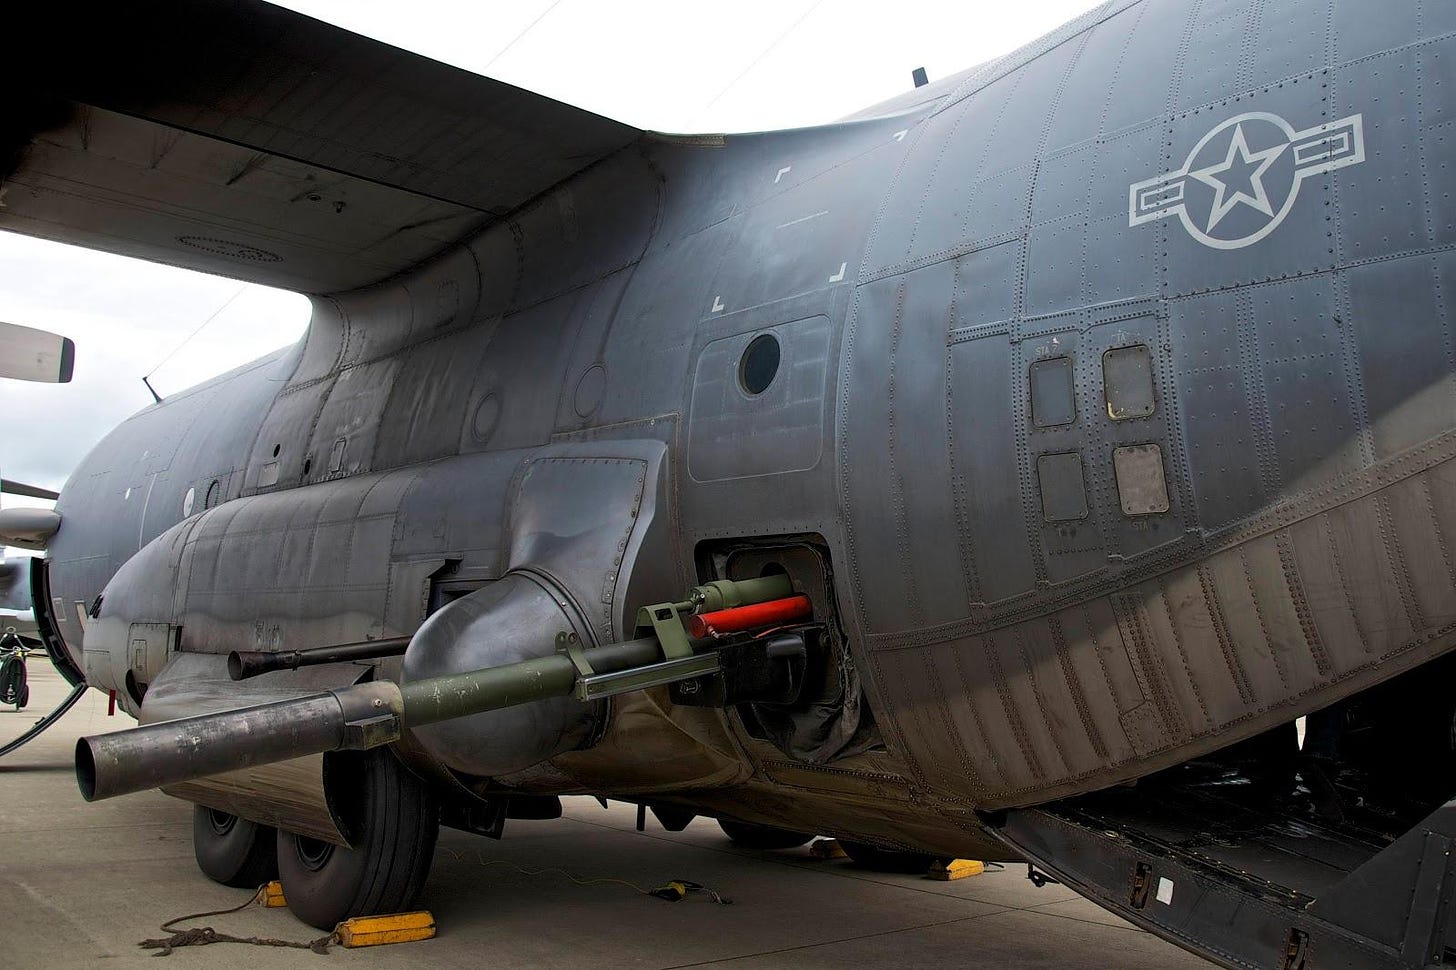 This is the 105mm Howitzer cannon on a Lockheed AC-130 gunship. Its recoil  has enough force to bench press over 20,000 lbs : r/pics